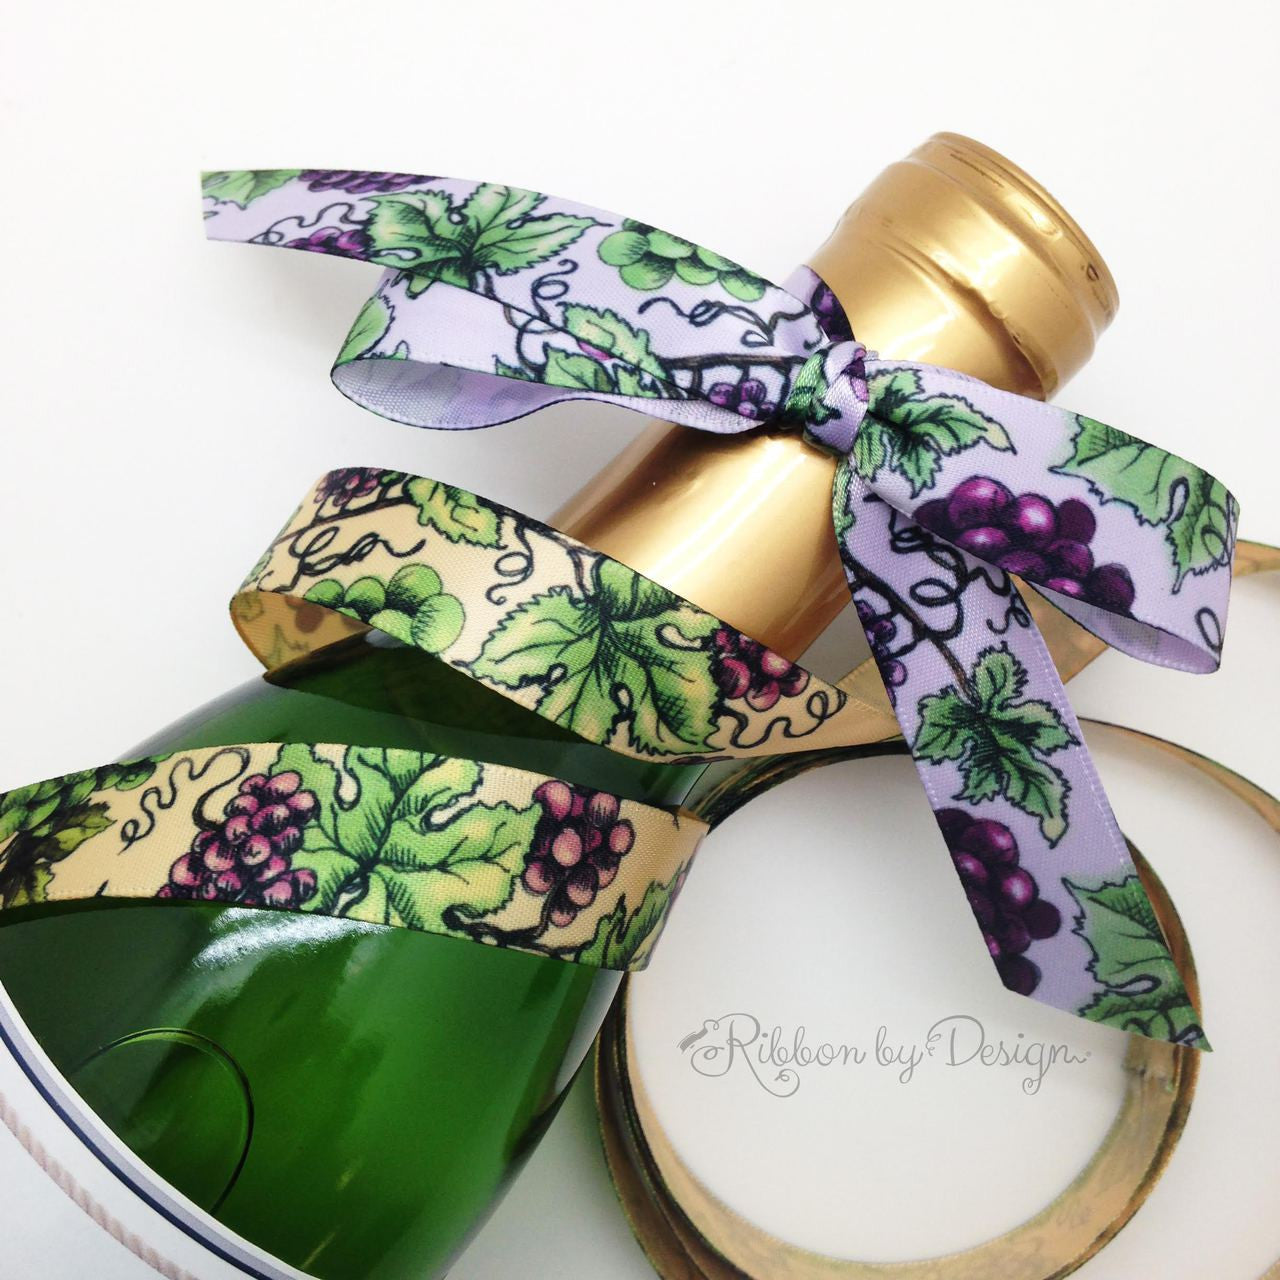 Grapes and grape leaves on raw silk and light orchid are such a pretty accent for a wine gift!